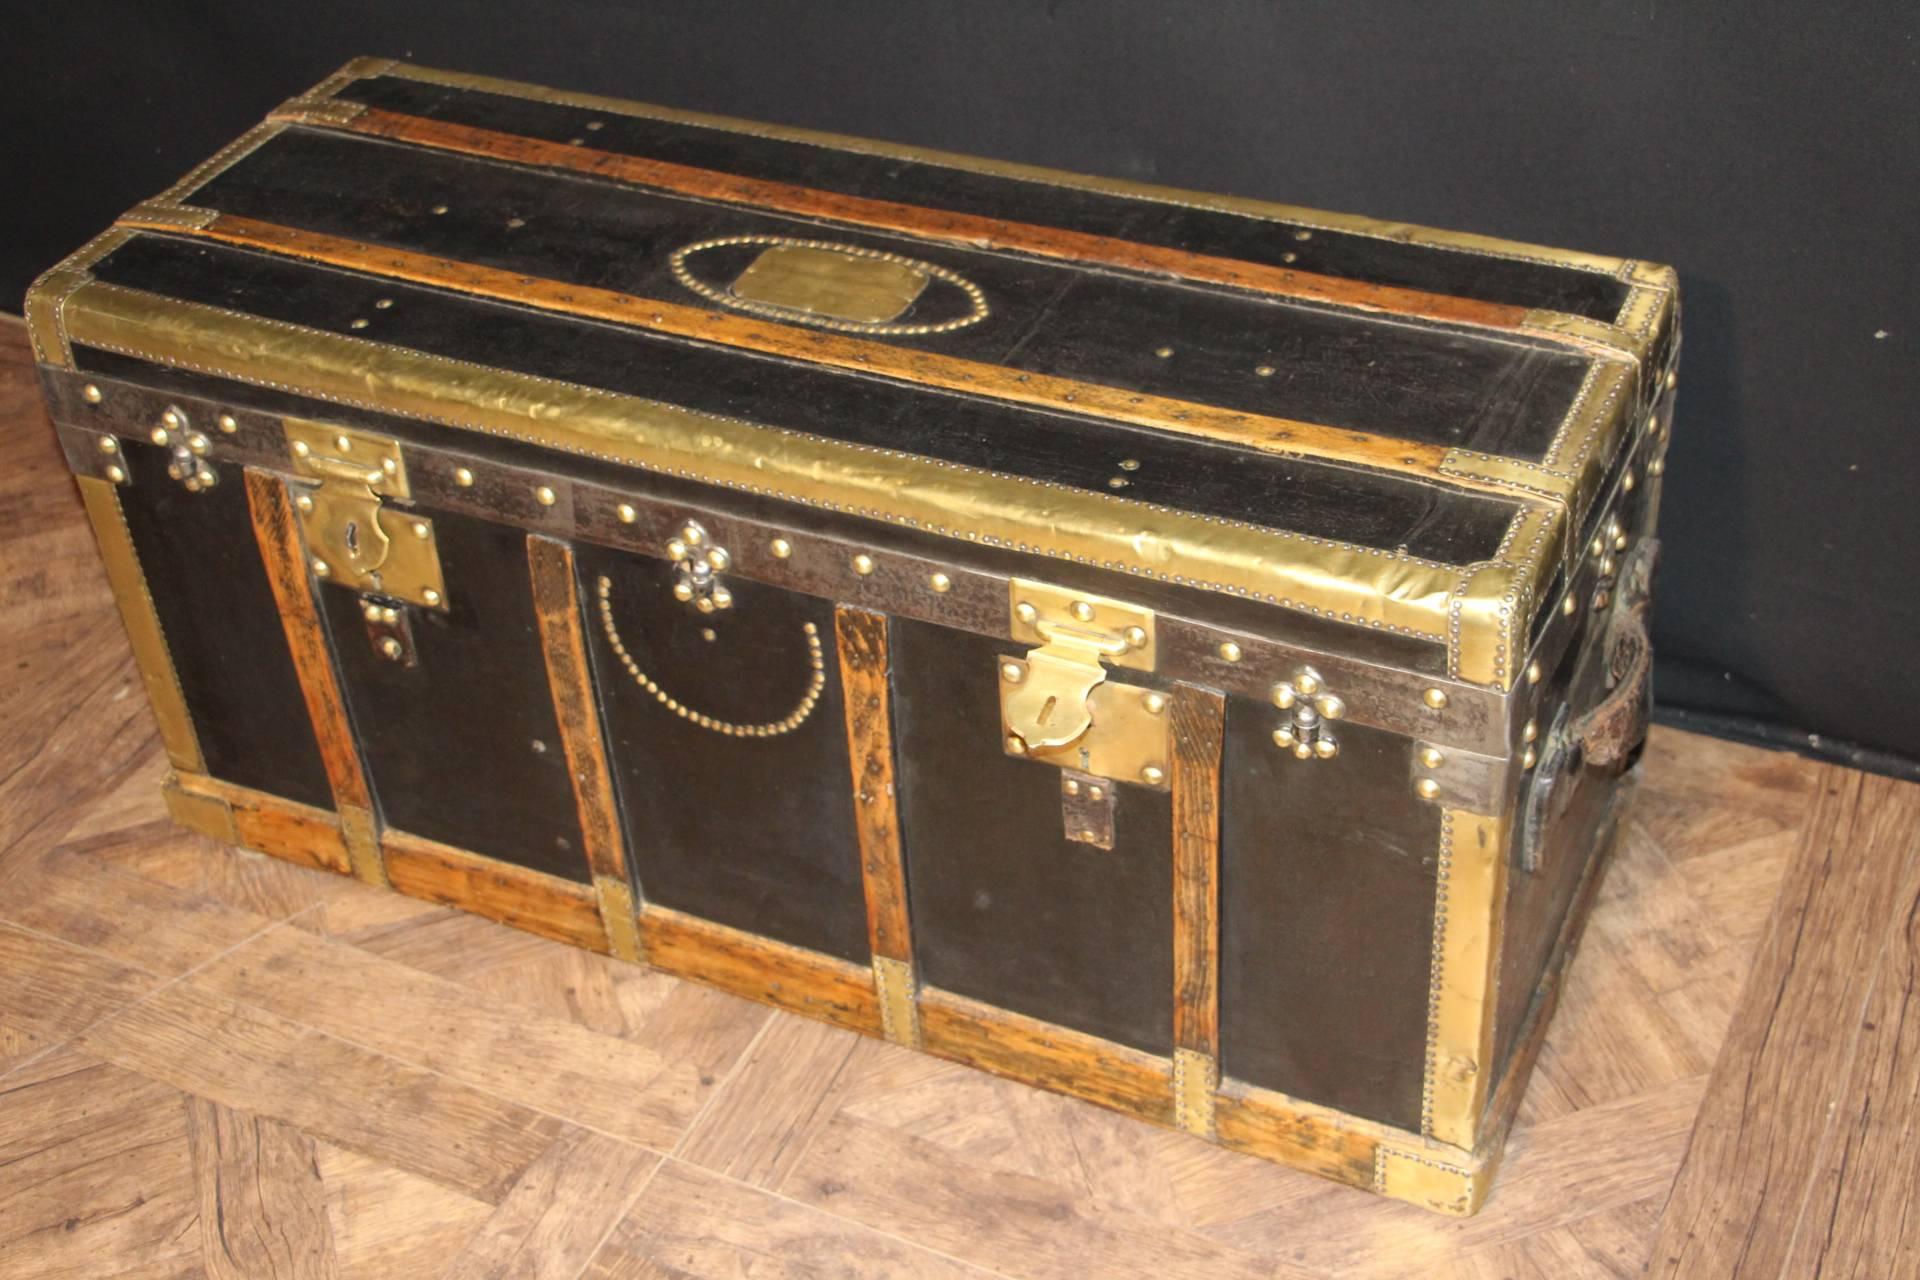 This balck canvas stemer trunk features brass trims,studs and locks as well as wood slats and large leather side handles.
It has got unusual proportions because and it is not deepit ,could be a very nice blanket box.
its interior is all original